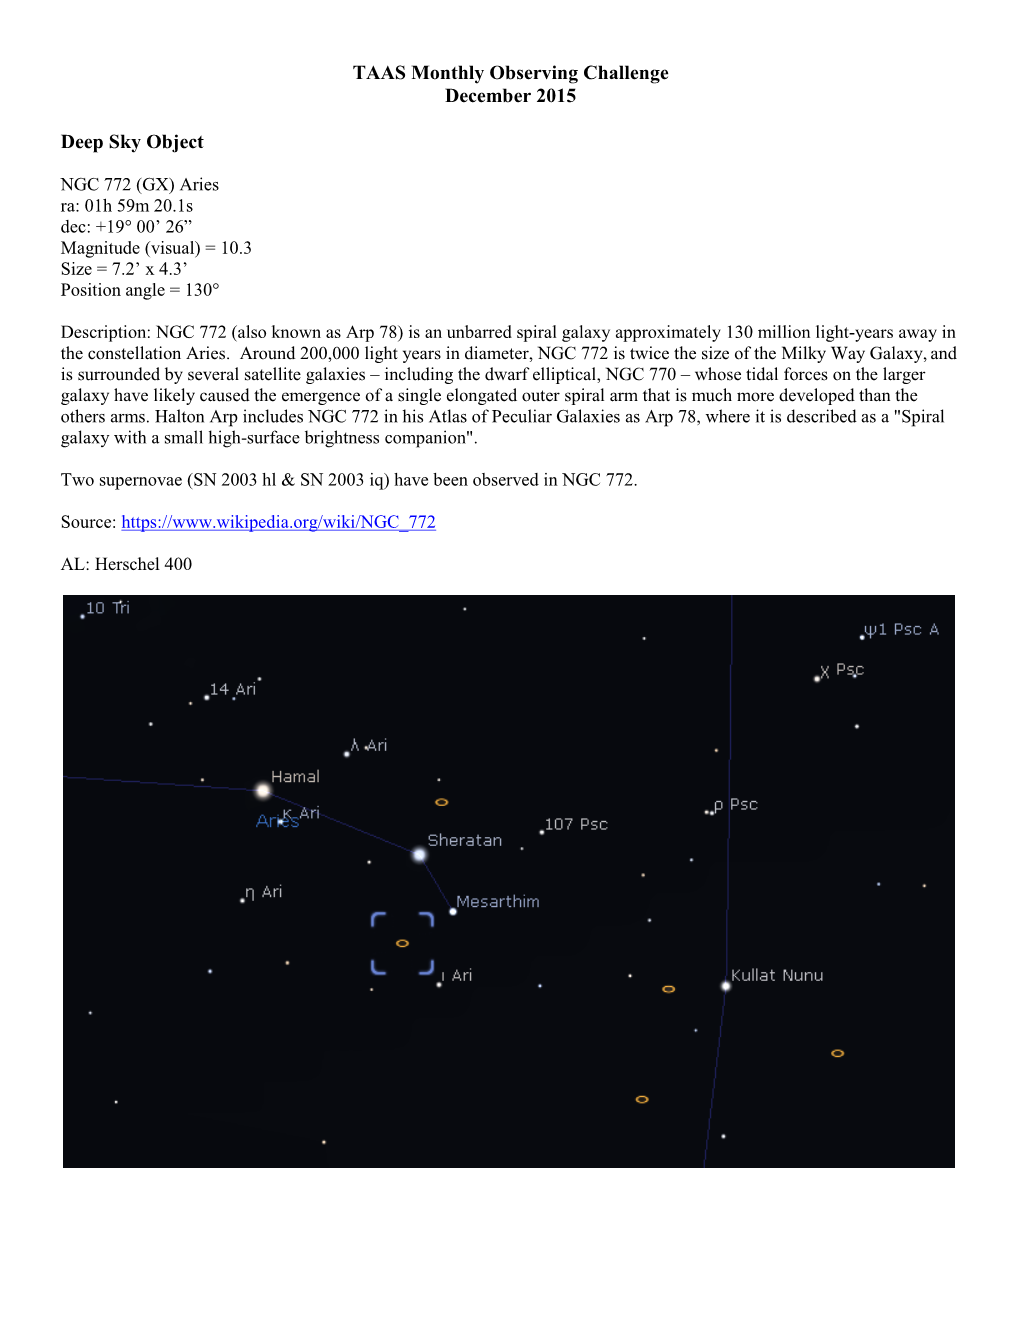 TAAS Monthly Observing Challenge December 2015 Deep Sky Object